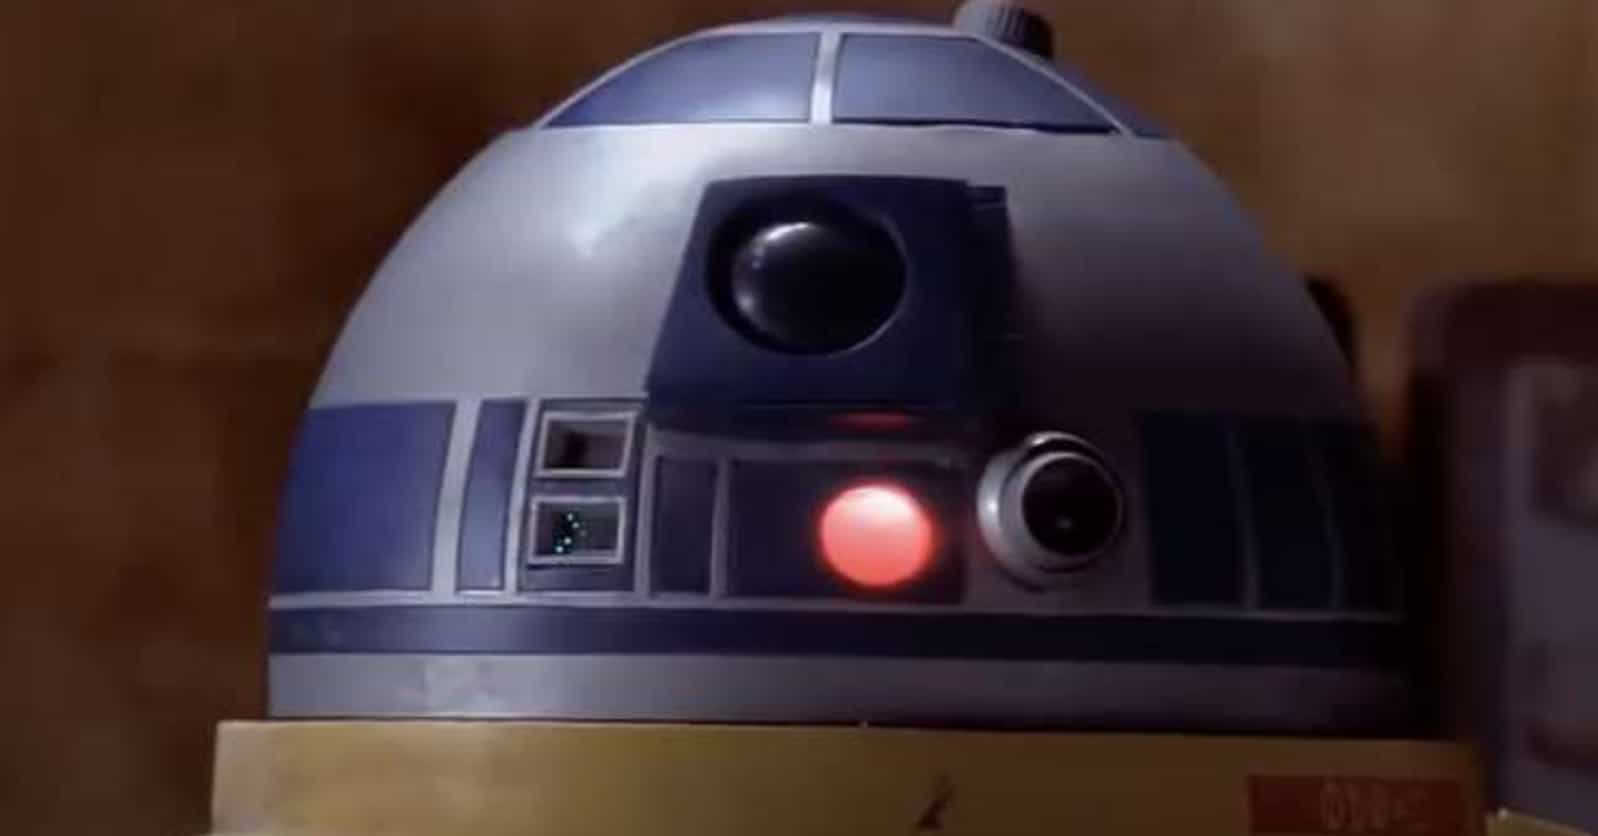 A Complete Timeline Of R2-D2, The Most Important Droid In The Star Wars Galaxy